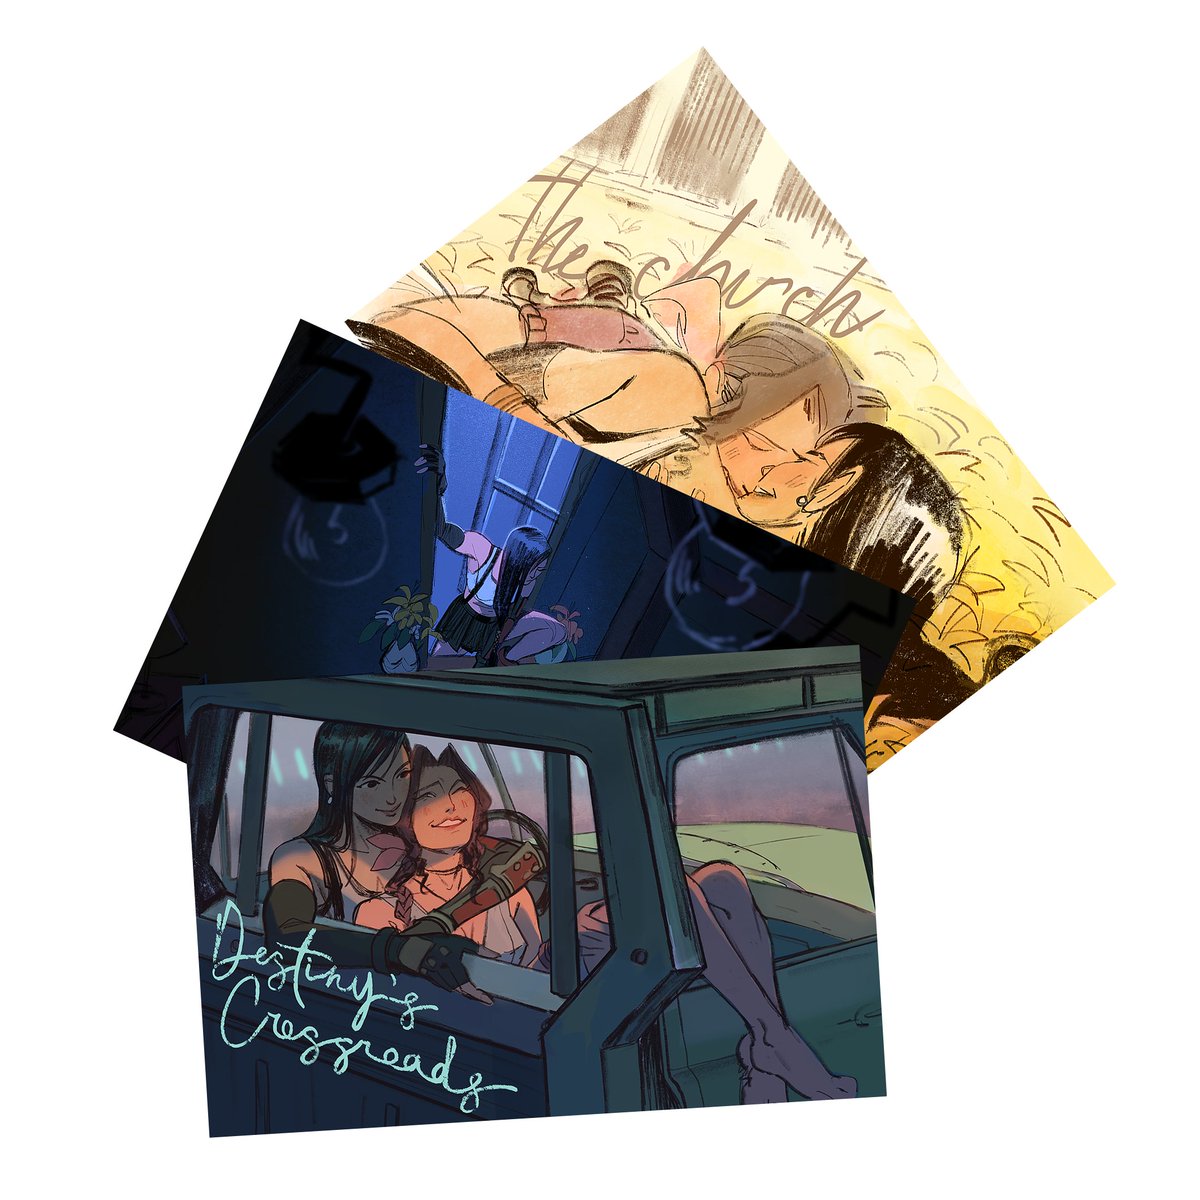 Thanks for weighing in!! You can p*rchase a reprint of these aerti / final fantasy 7 postcards from the l*nk below. Pay what you want, all proceeds will be d*nated toward helping families evacuate g*za #FF7 #FF7R